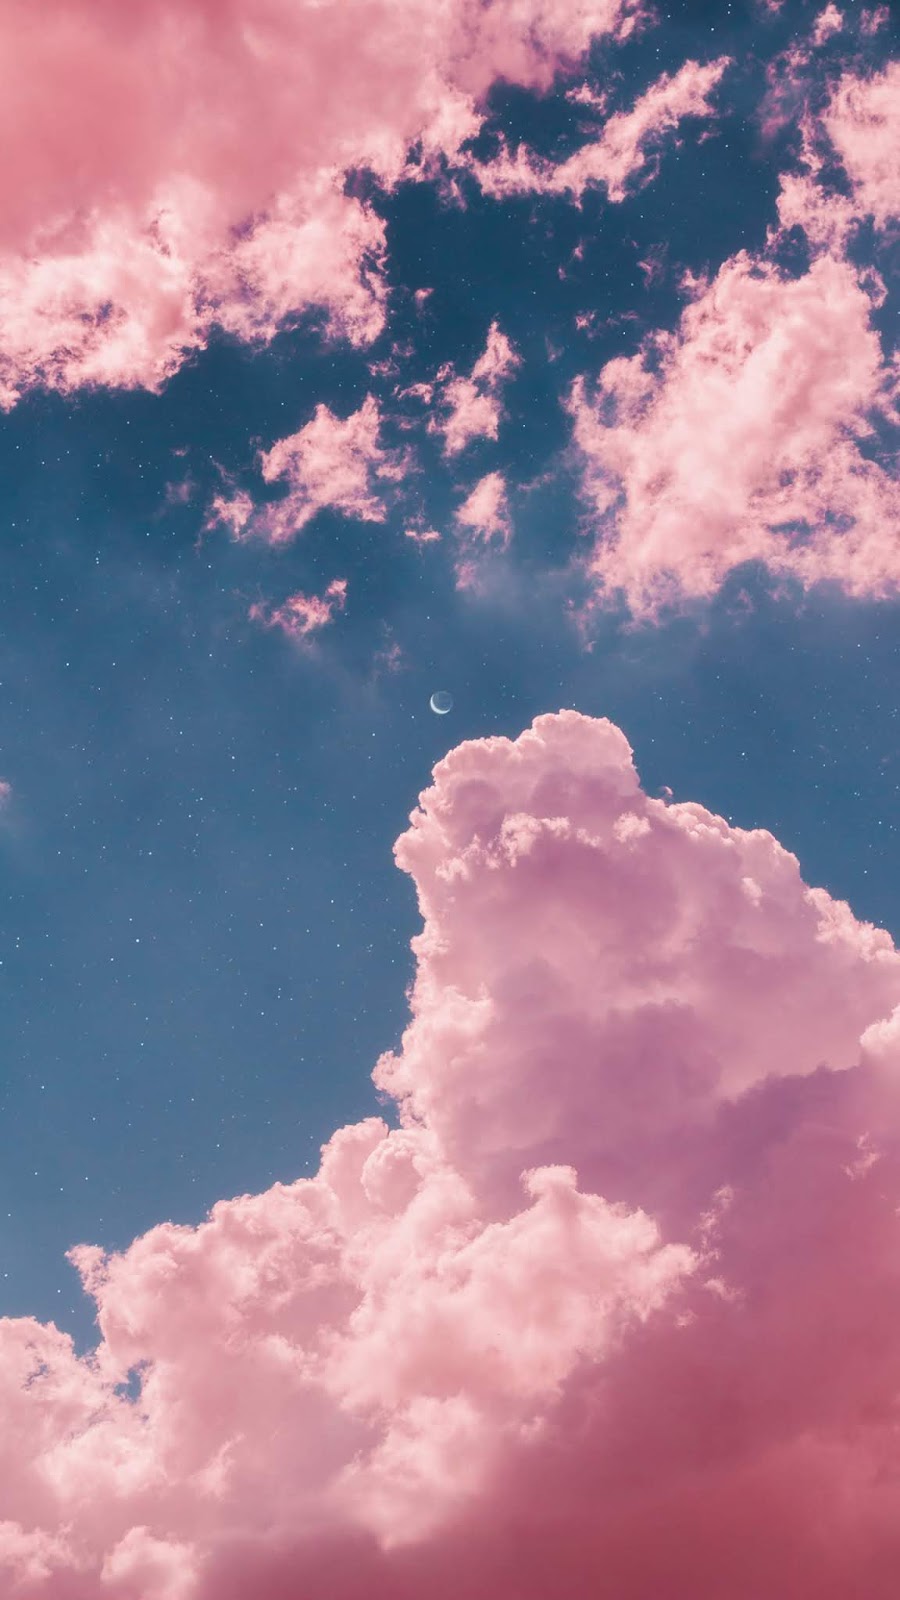 Two moon in the aesthetic pink sky